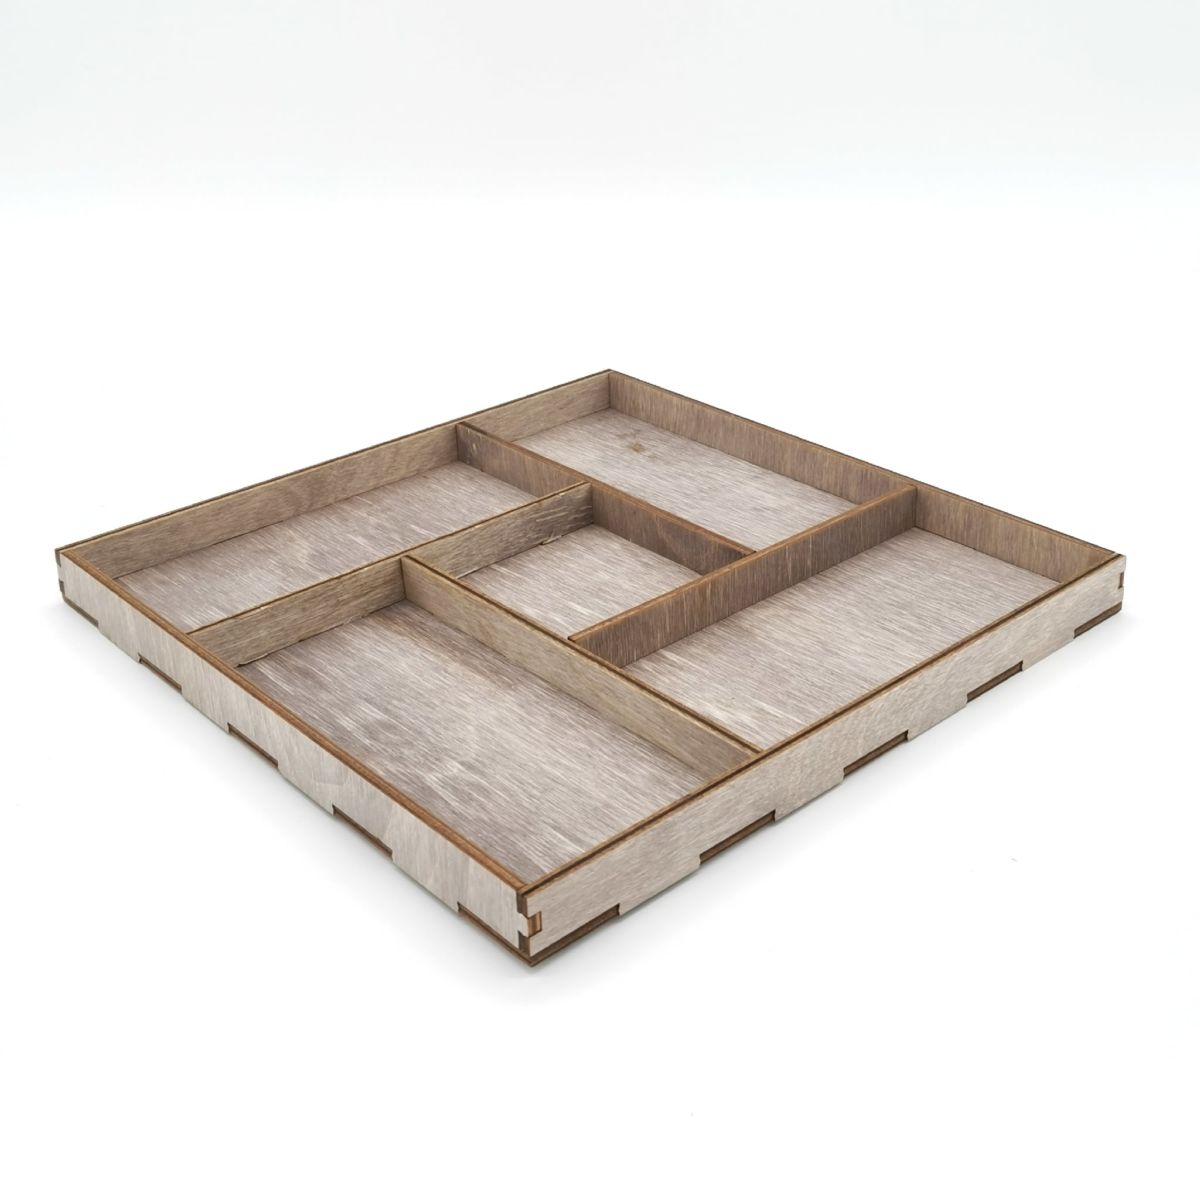 Laser Cut Wooden Square Serving Tray With Five Unique Designed Compartments Free Vector